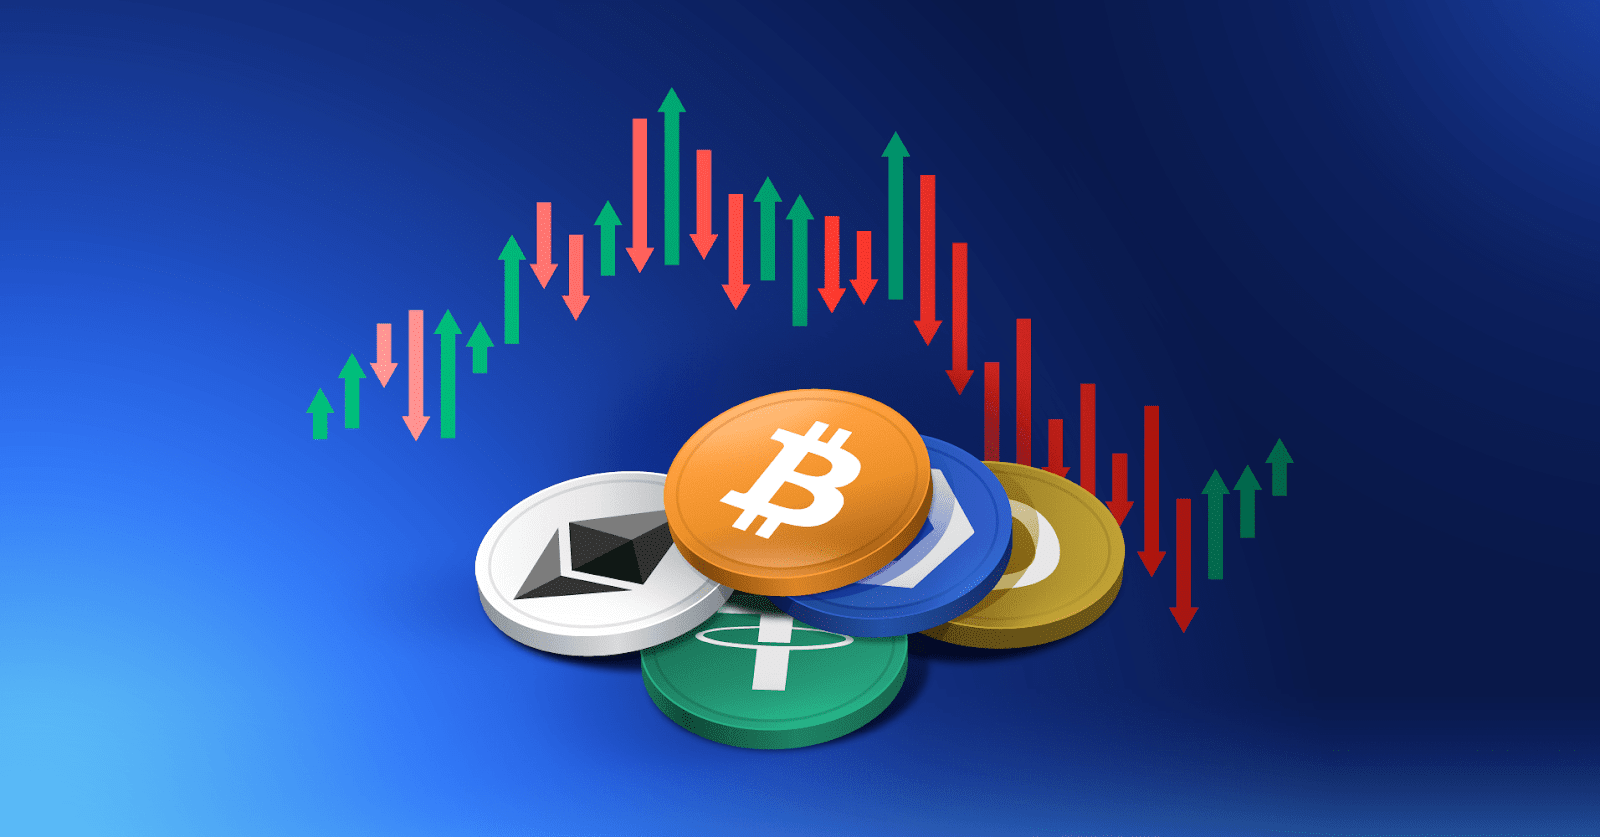 8 Best Cryptocurrencies for Long-term Investment in 